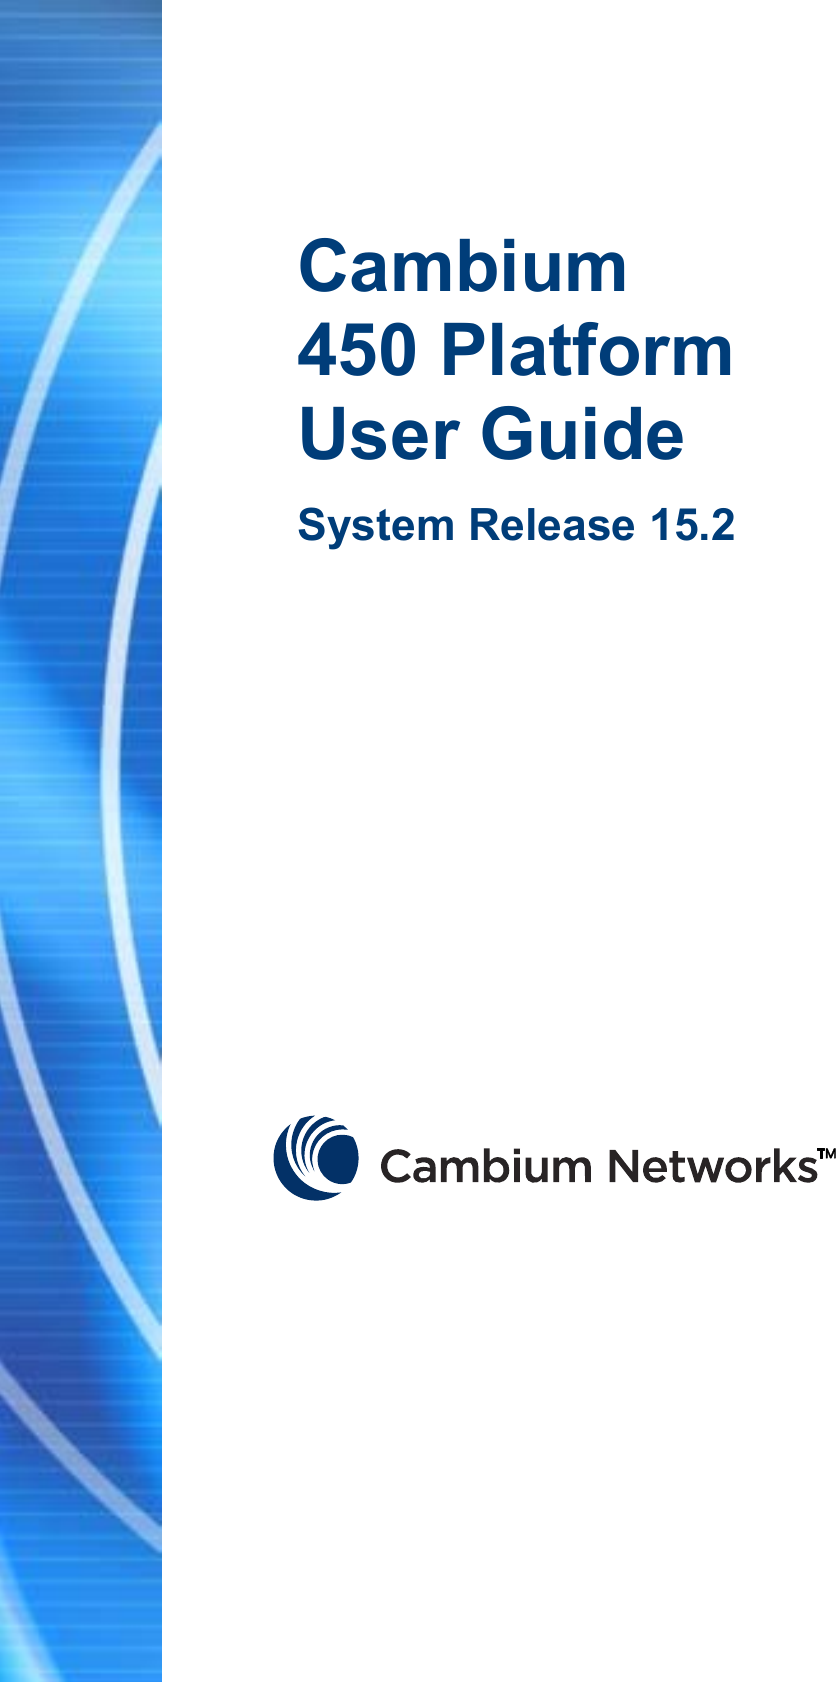  33F  Cambium  450 Platform  User Guide System Release 15.2                  pass  